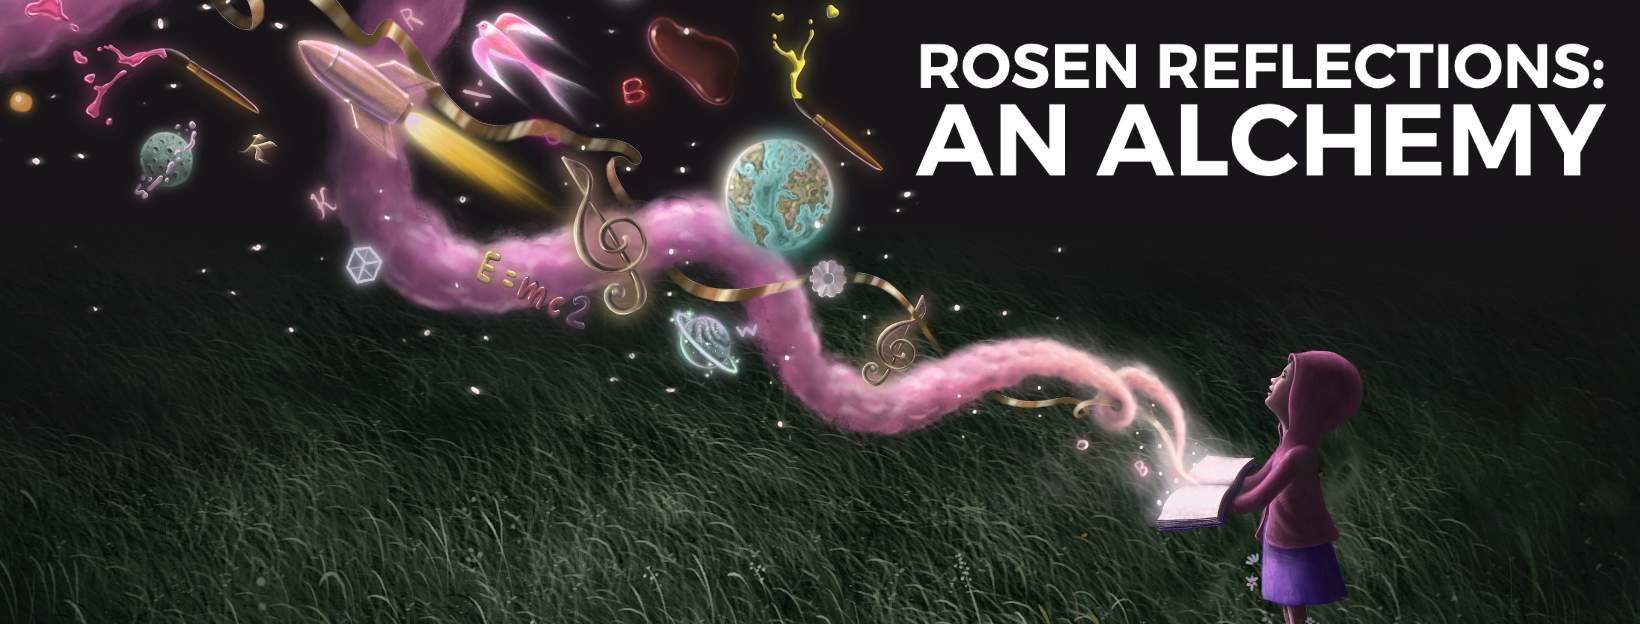 Image linking to an article titled "Rosen Reflections: An Alchemy". Digital art of a dark grassy field, with a small child in the bottom right who wears a hoodie and skirt. The child holds an open book, out of which spirals a mystical line of smoke. Circling the smoke are various things, such as a globe, music notes, rocket, pen, the moon, a cube, and the formula E=mc^2.